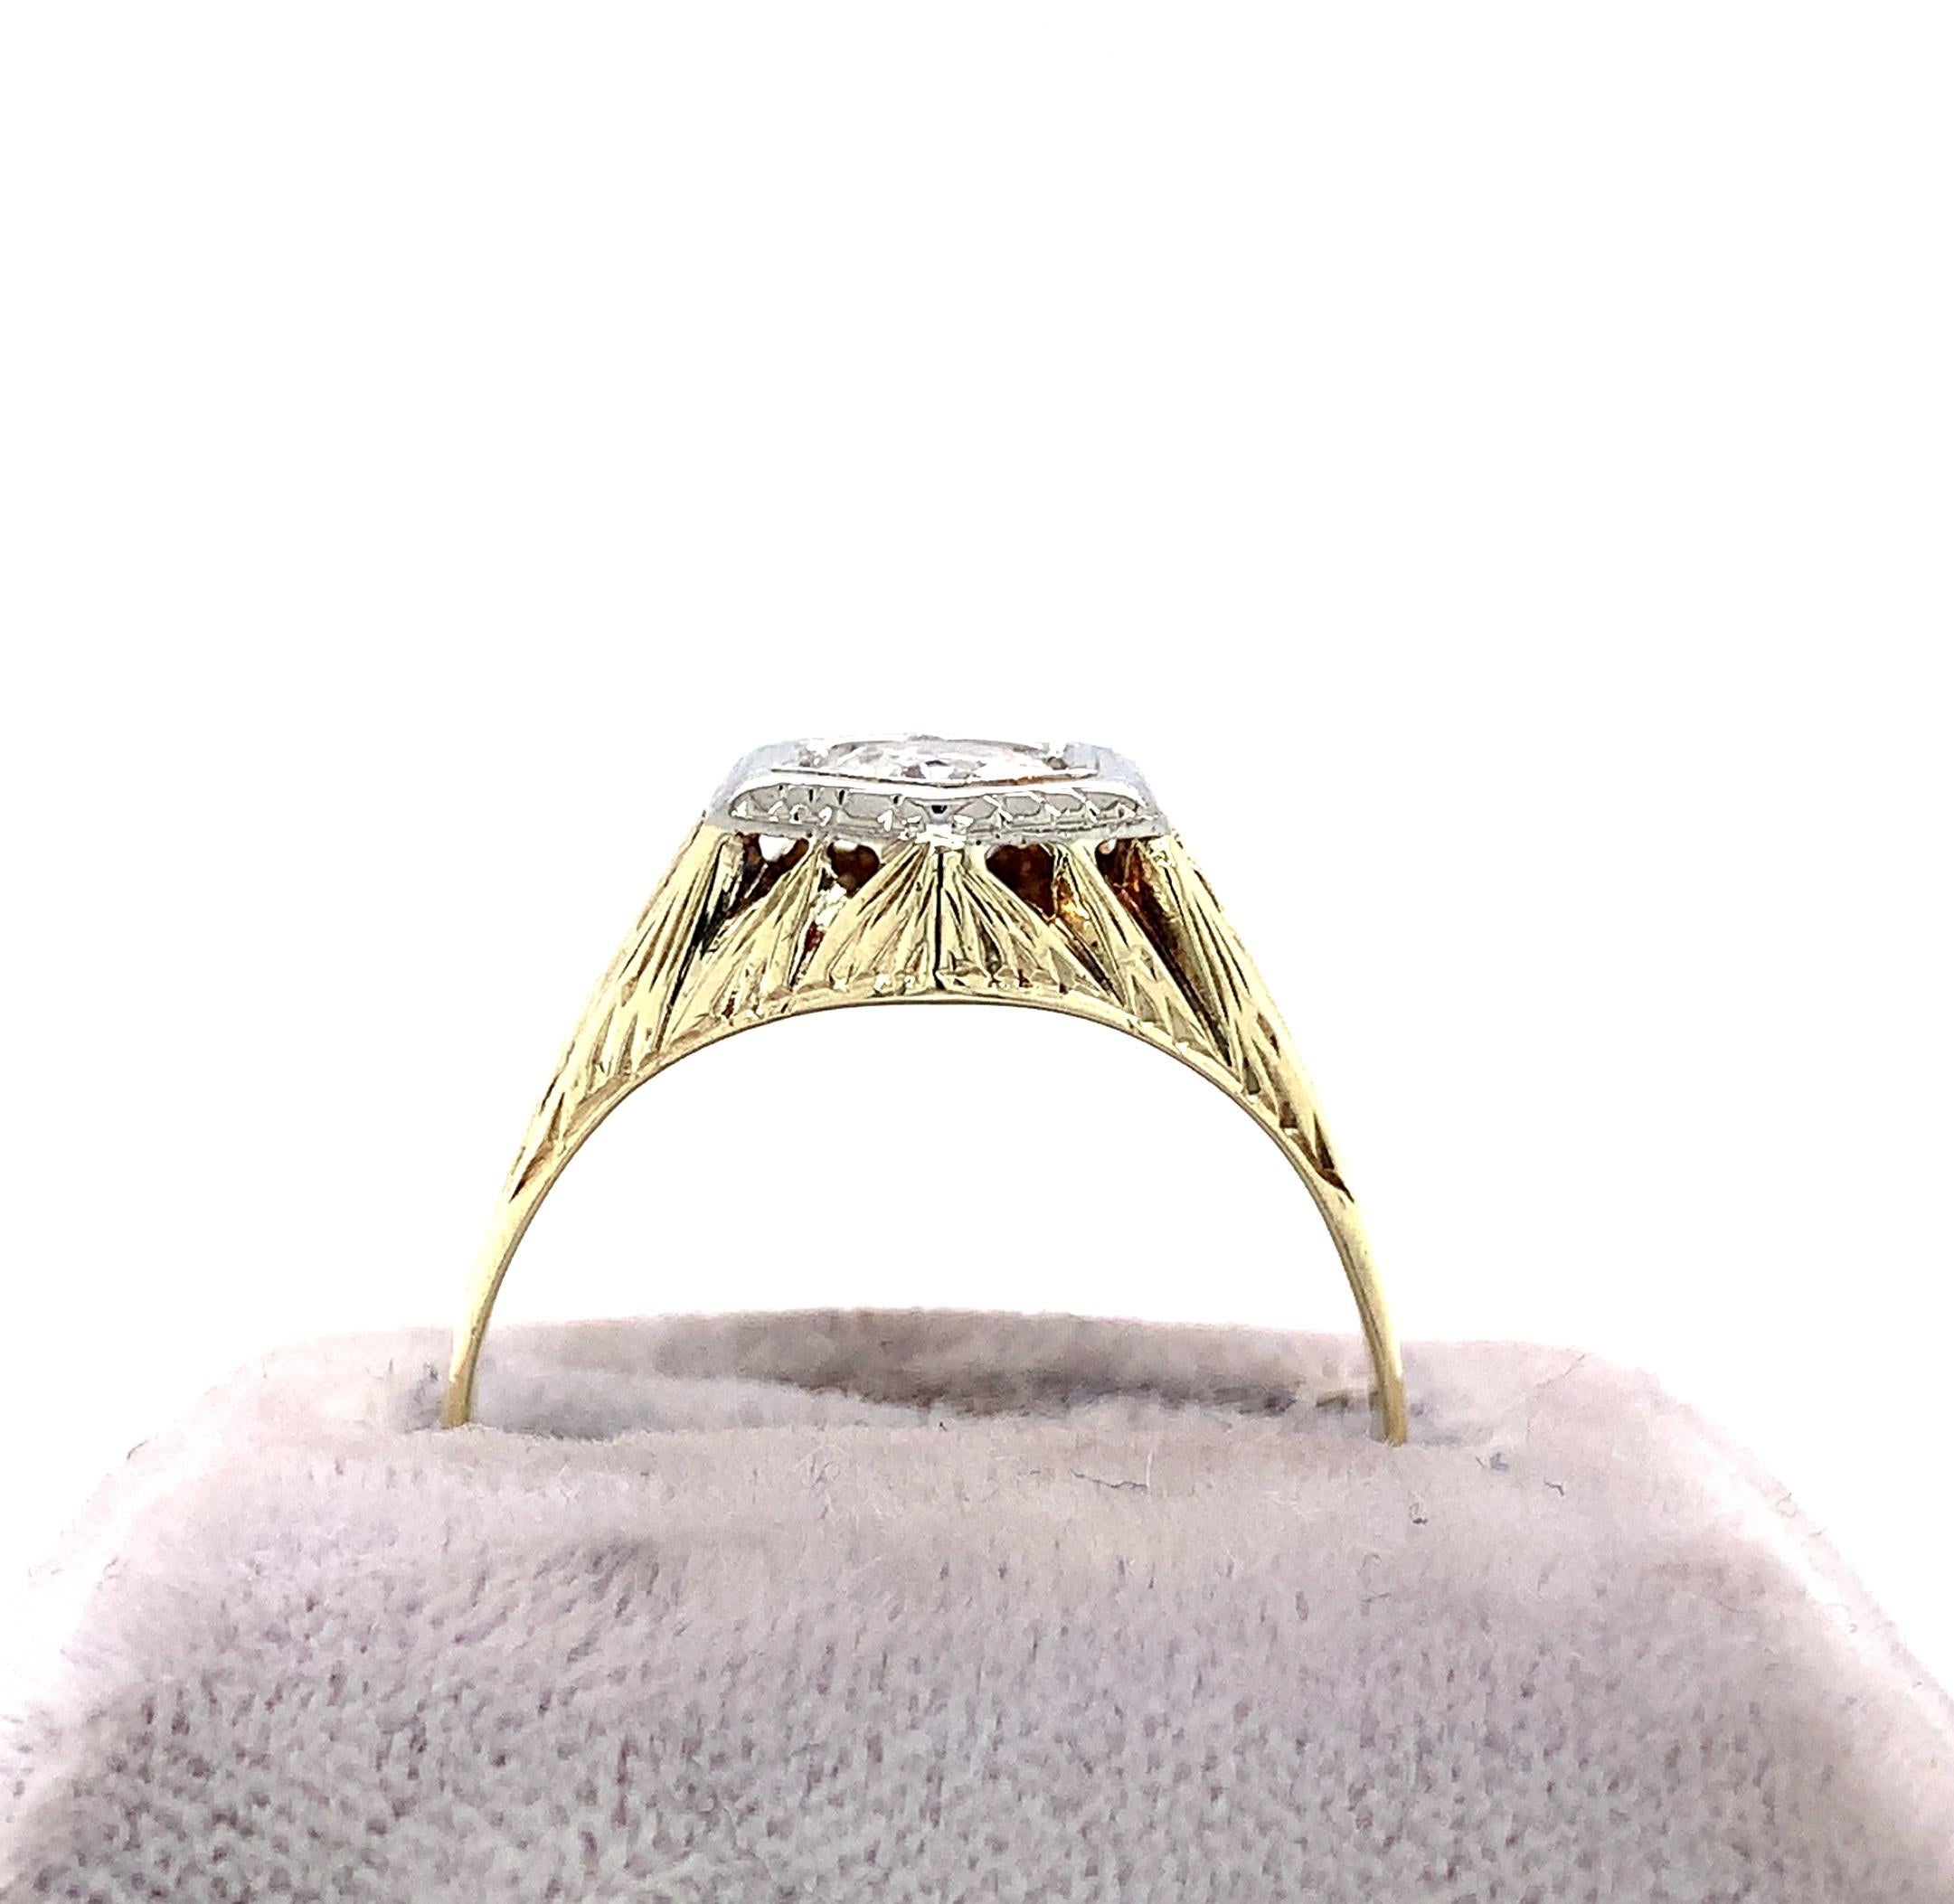 14K yellow gold Art Deco men's ring with a European cut diamond set in 18K white gold top. The diamond weighs .66ct and measures about 5.5mm. The diamond has SI-1 clarity and H-I color. The setting is all hand engraved. The ring fits a size 10